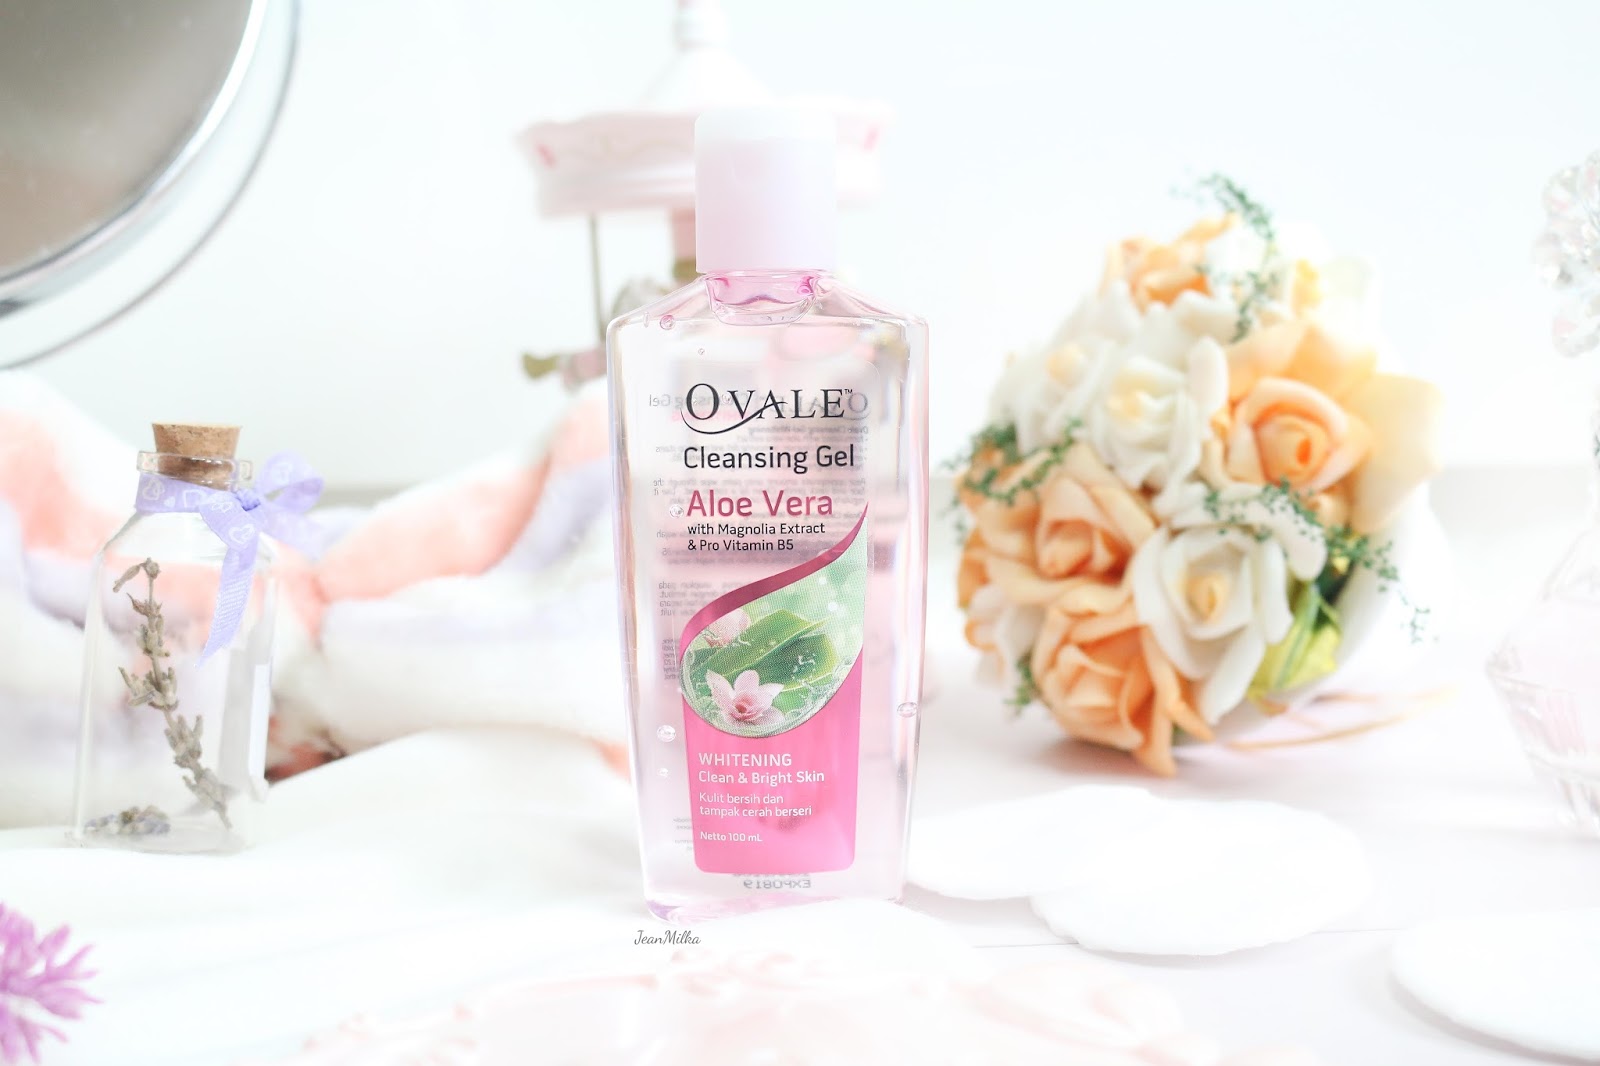 ovale, ovale cleansing gel, review ovale cleansing gel, makeup, makeup remover, skincare, makeup indonesia, kosmetik indonesia, ovale beauty